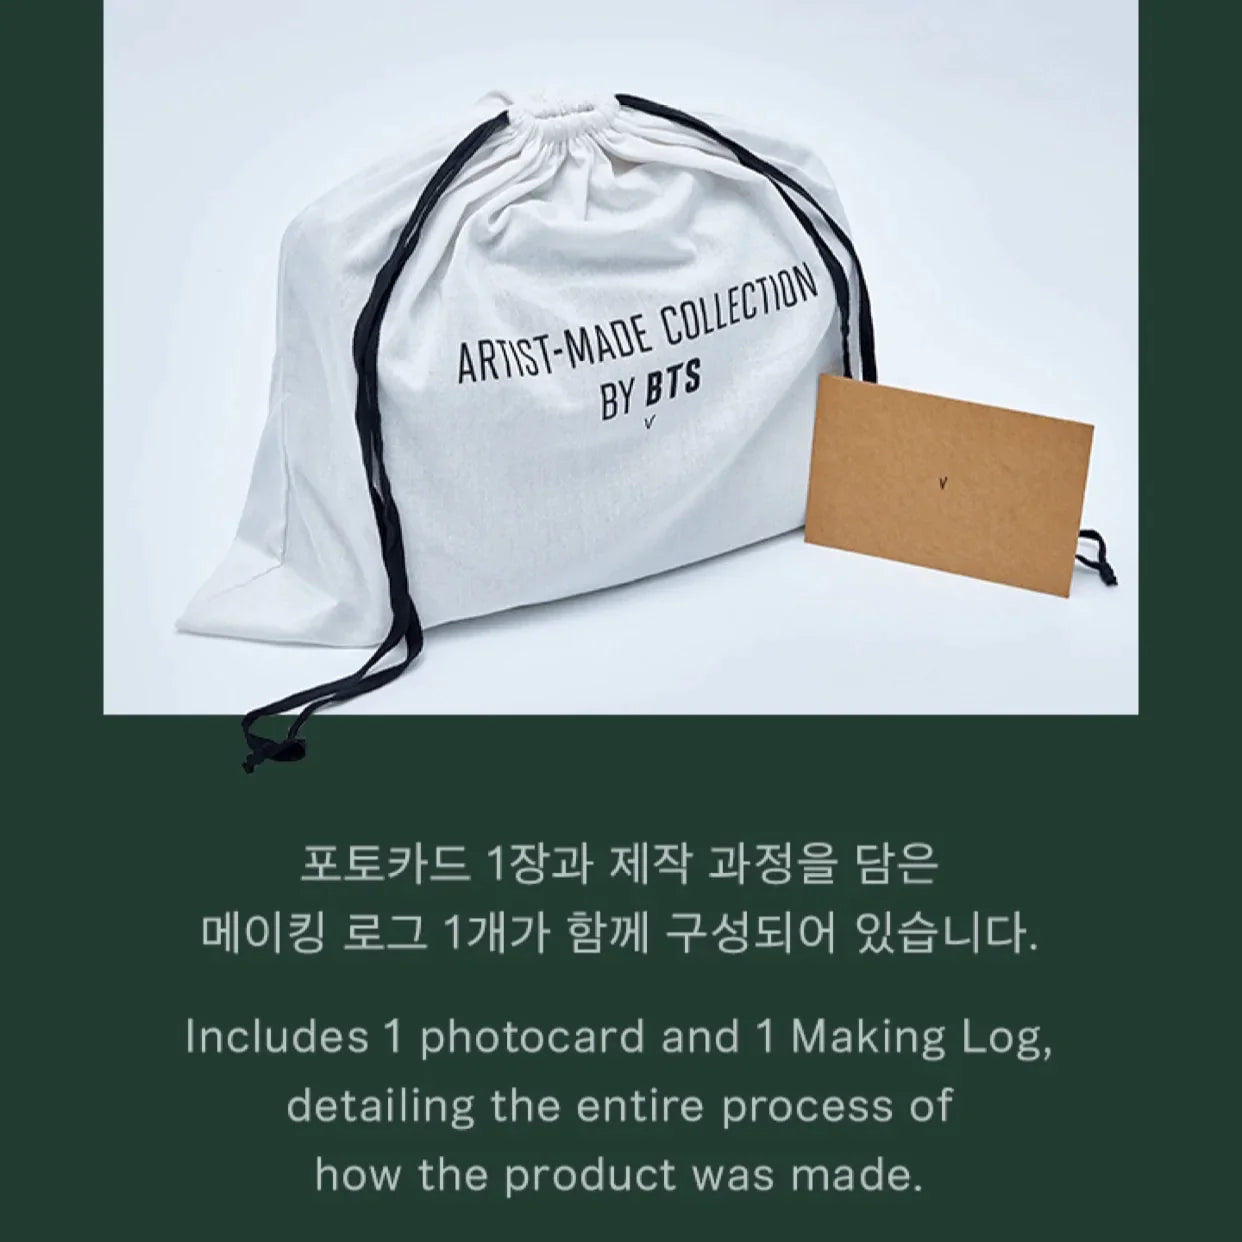 Official BTS Taehyung Artist made collection mute boston bag by V